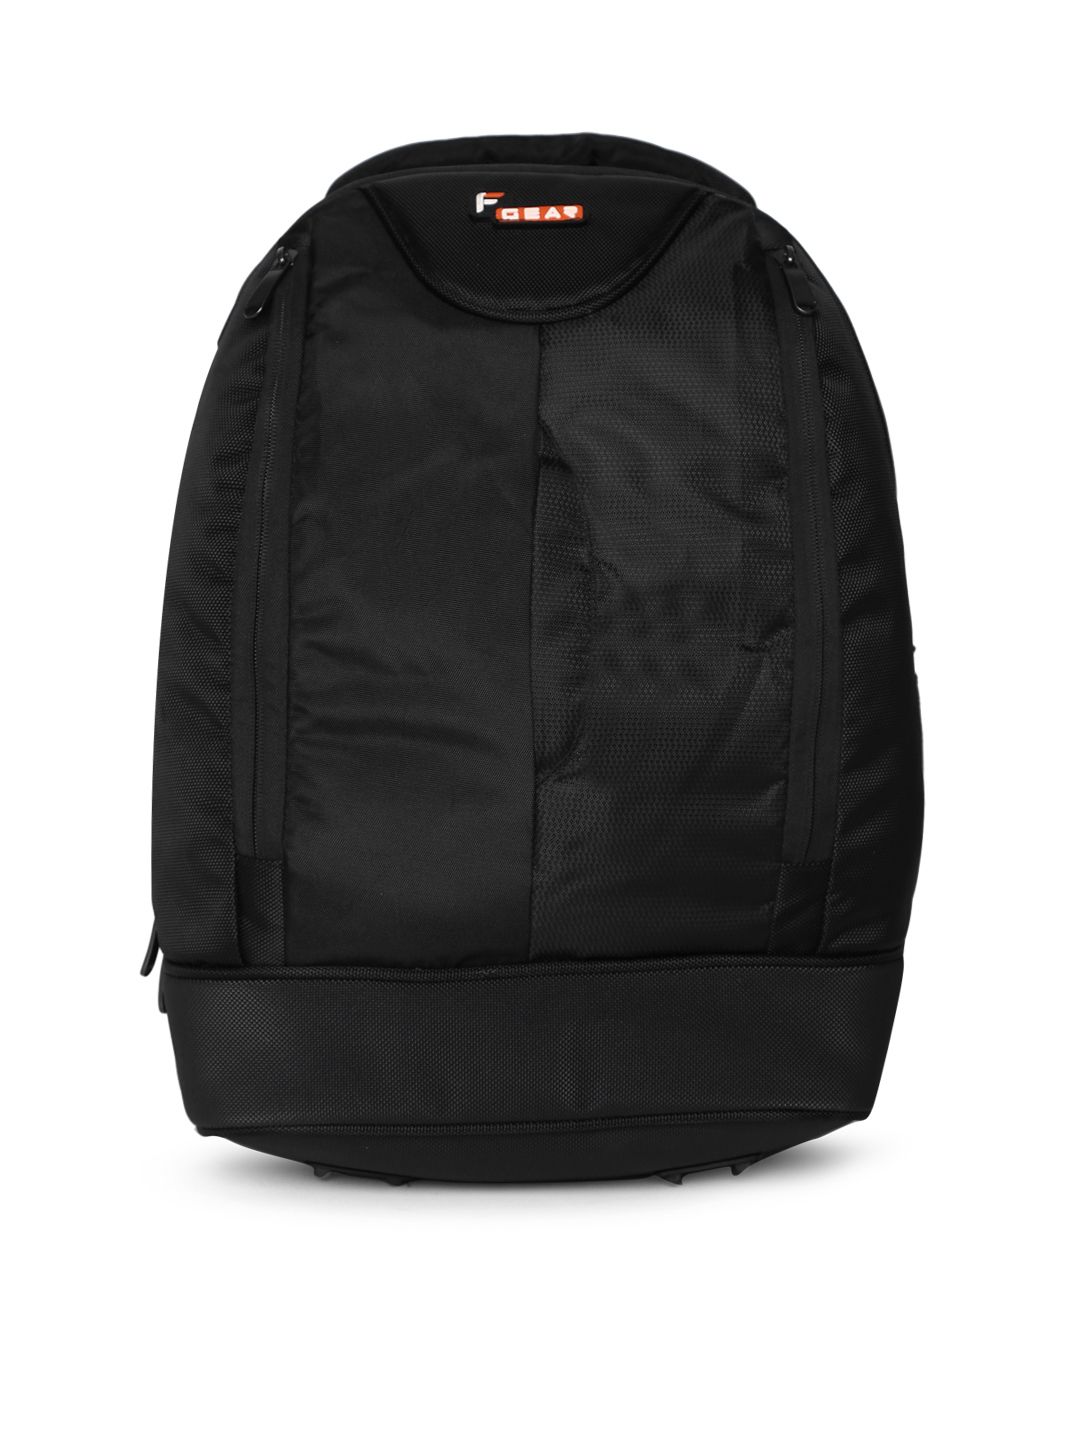 F Gear Unisex Booster V2 Black Solid Backpack Price in India